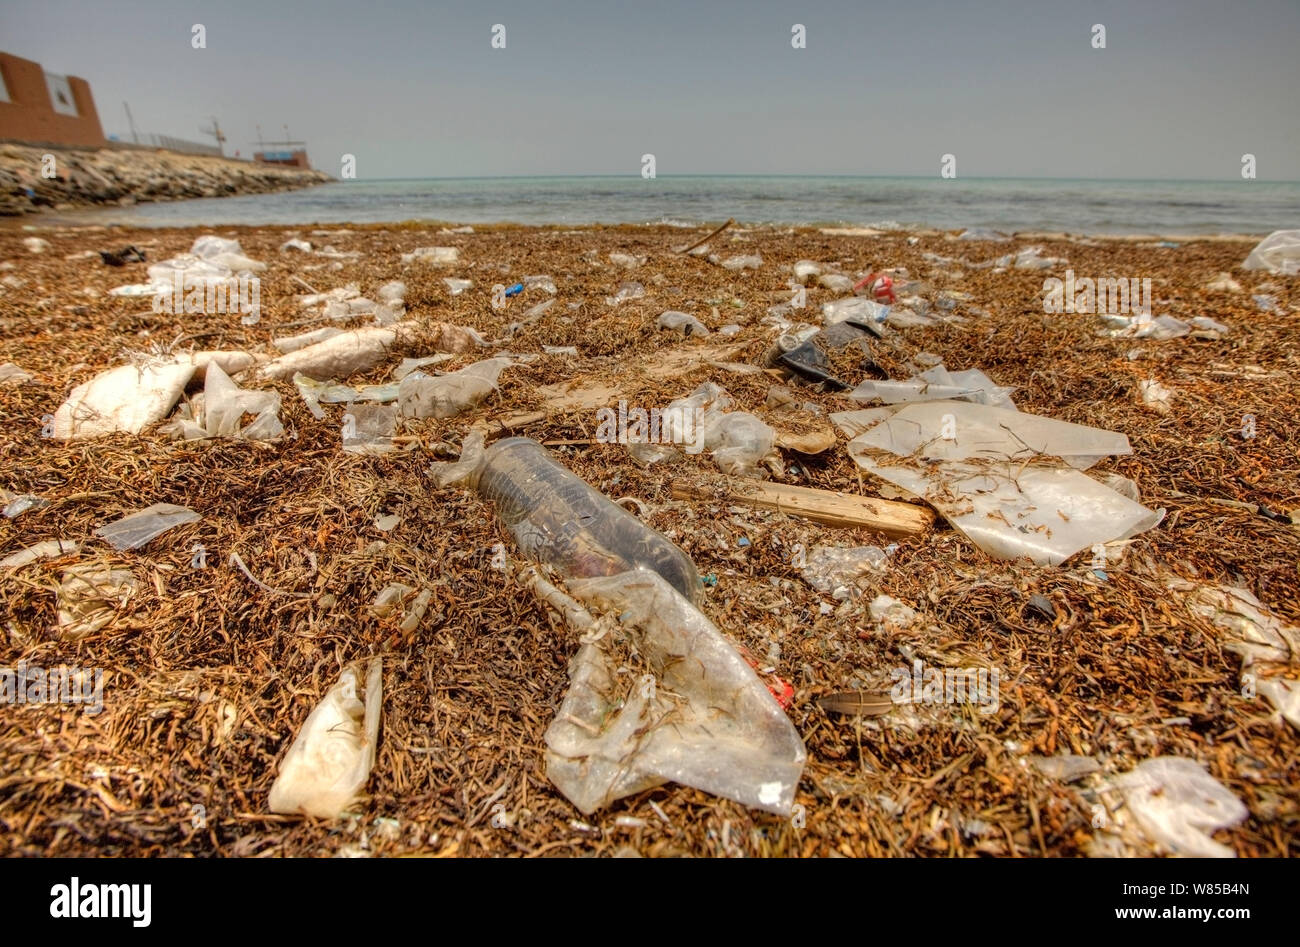 Plastic pollution at Al Jazayer Beach, Bahrain. All non-editorial uses must be cleared individually. Stock Photo